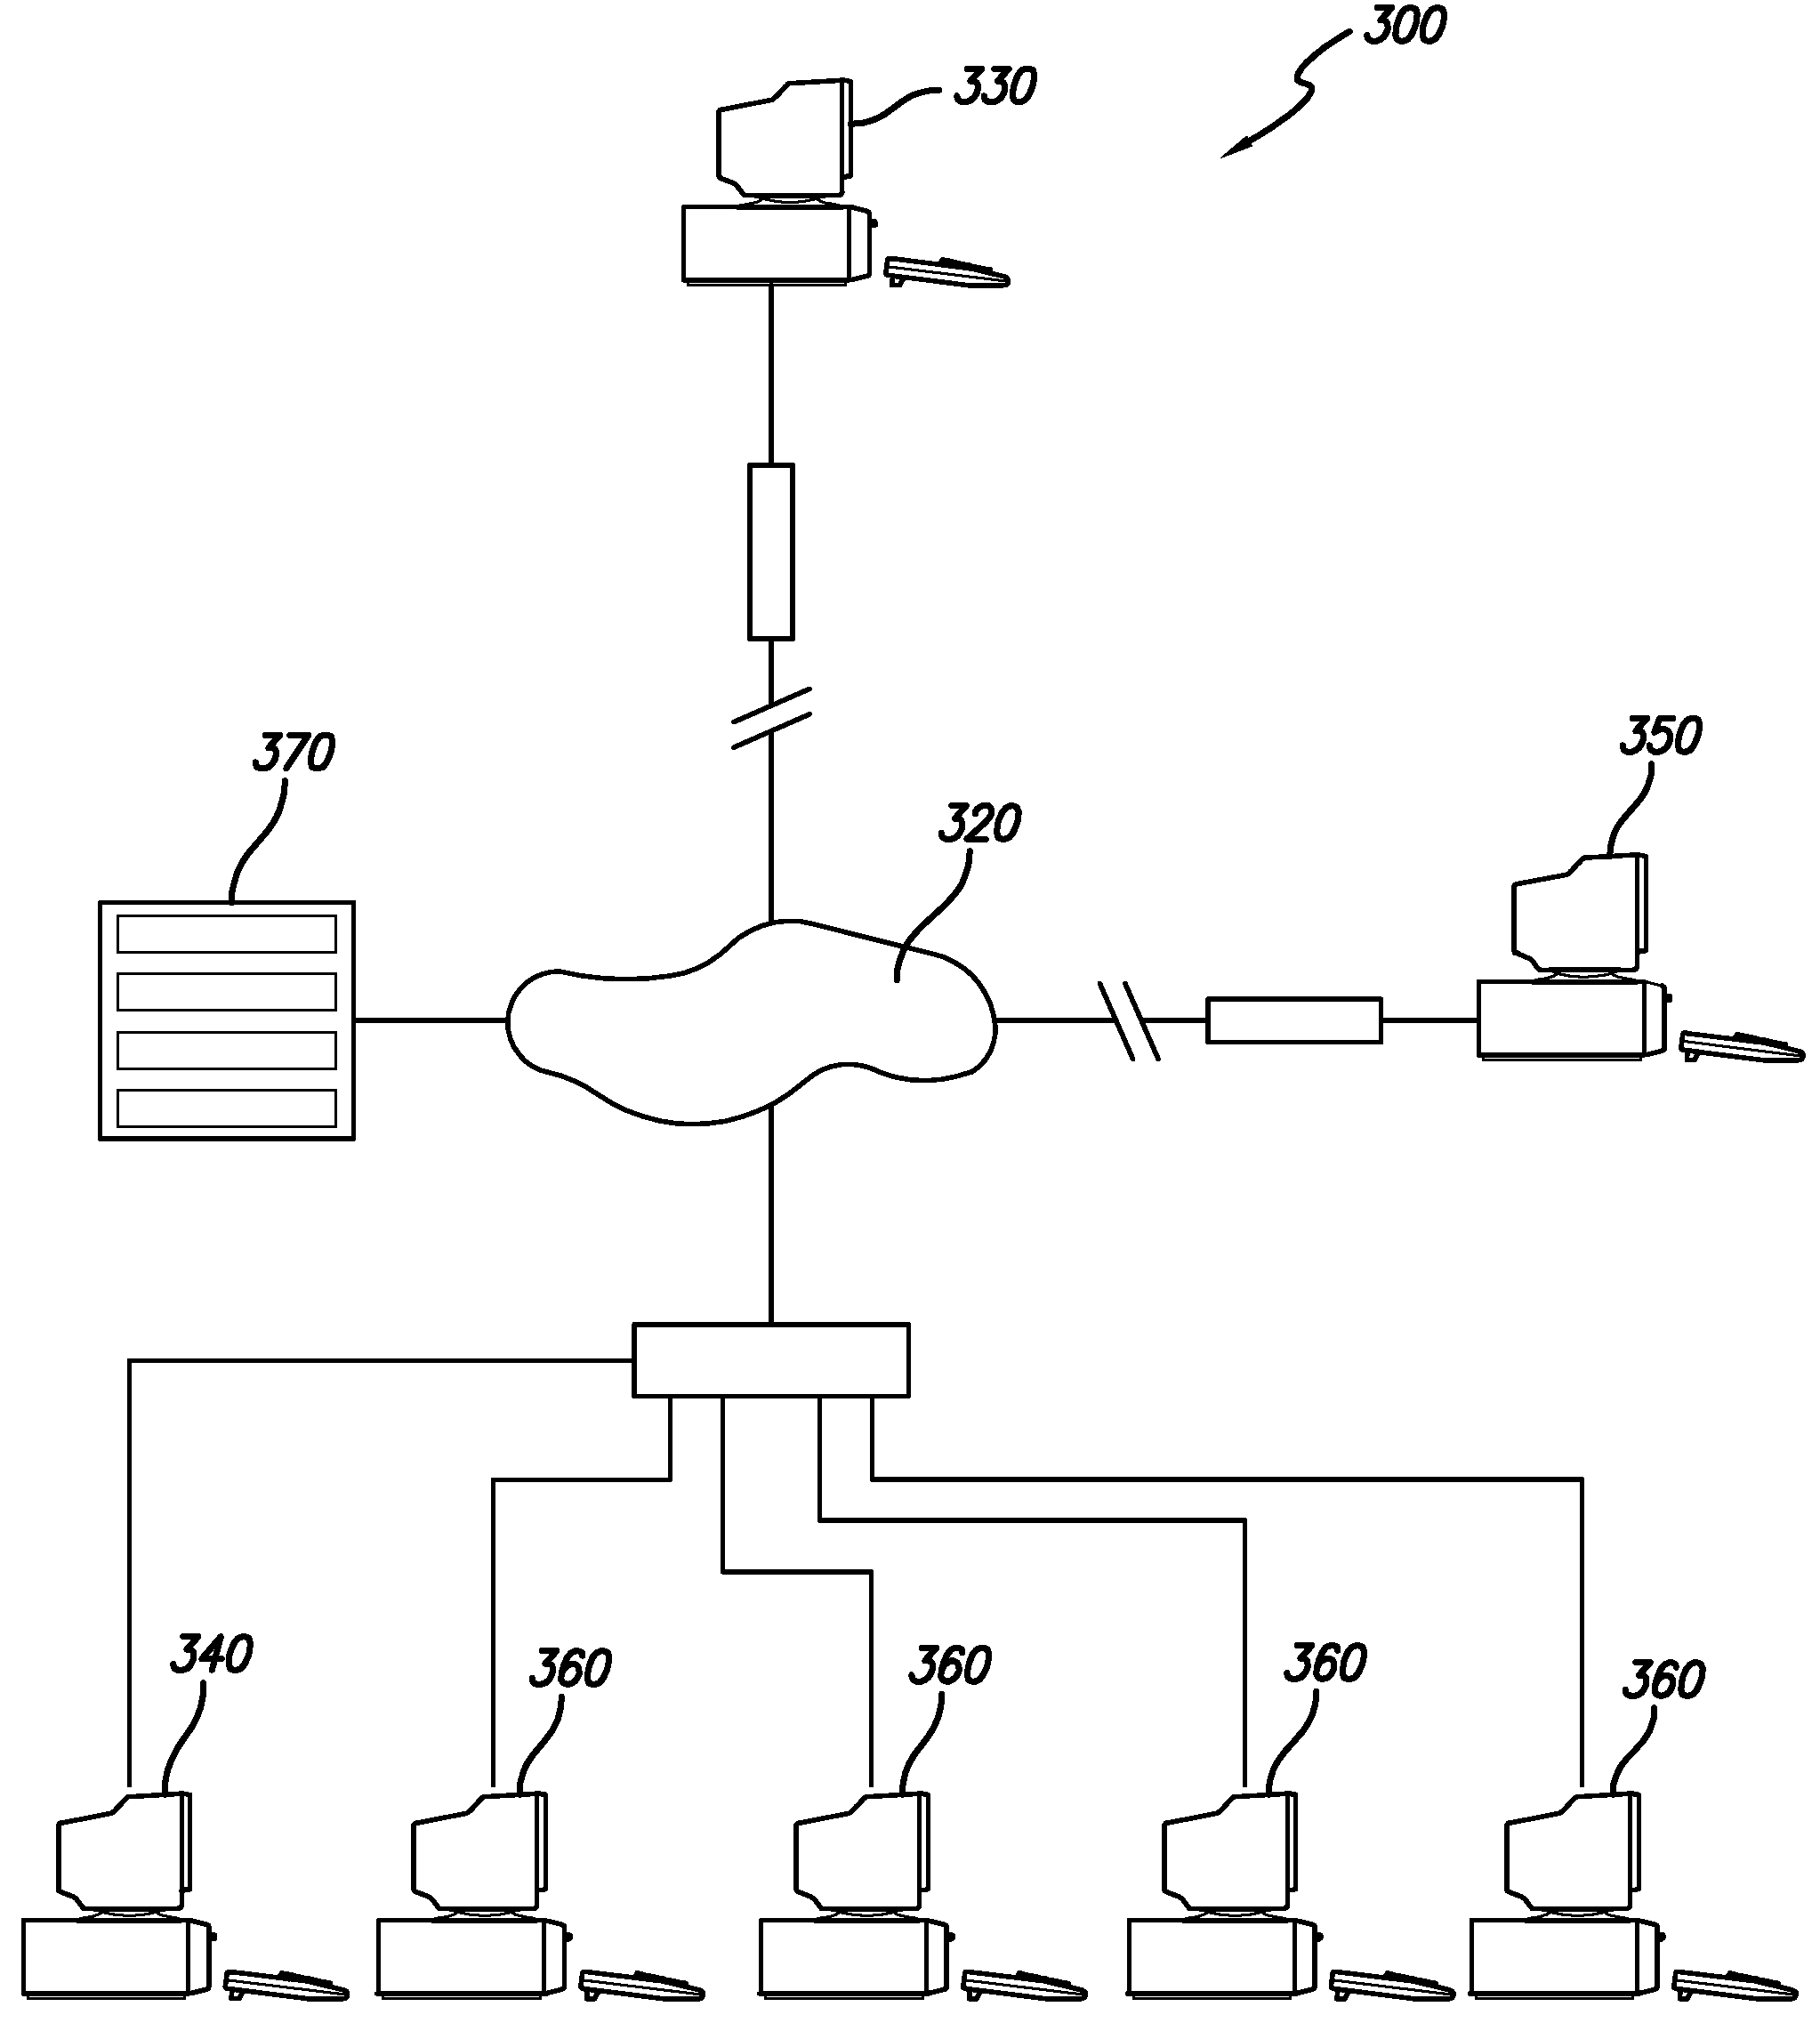 System and method of monitoring computer usage